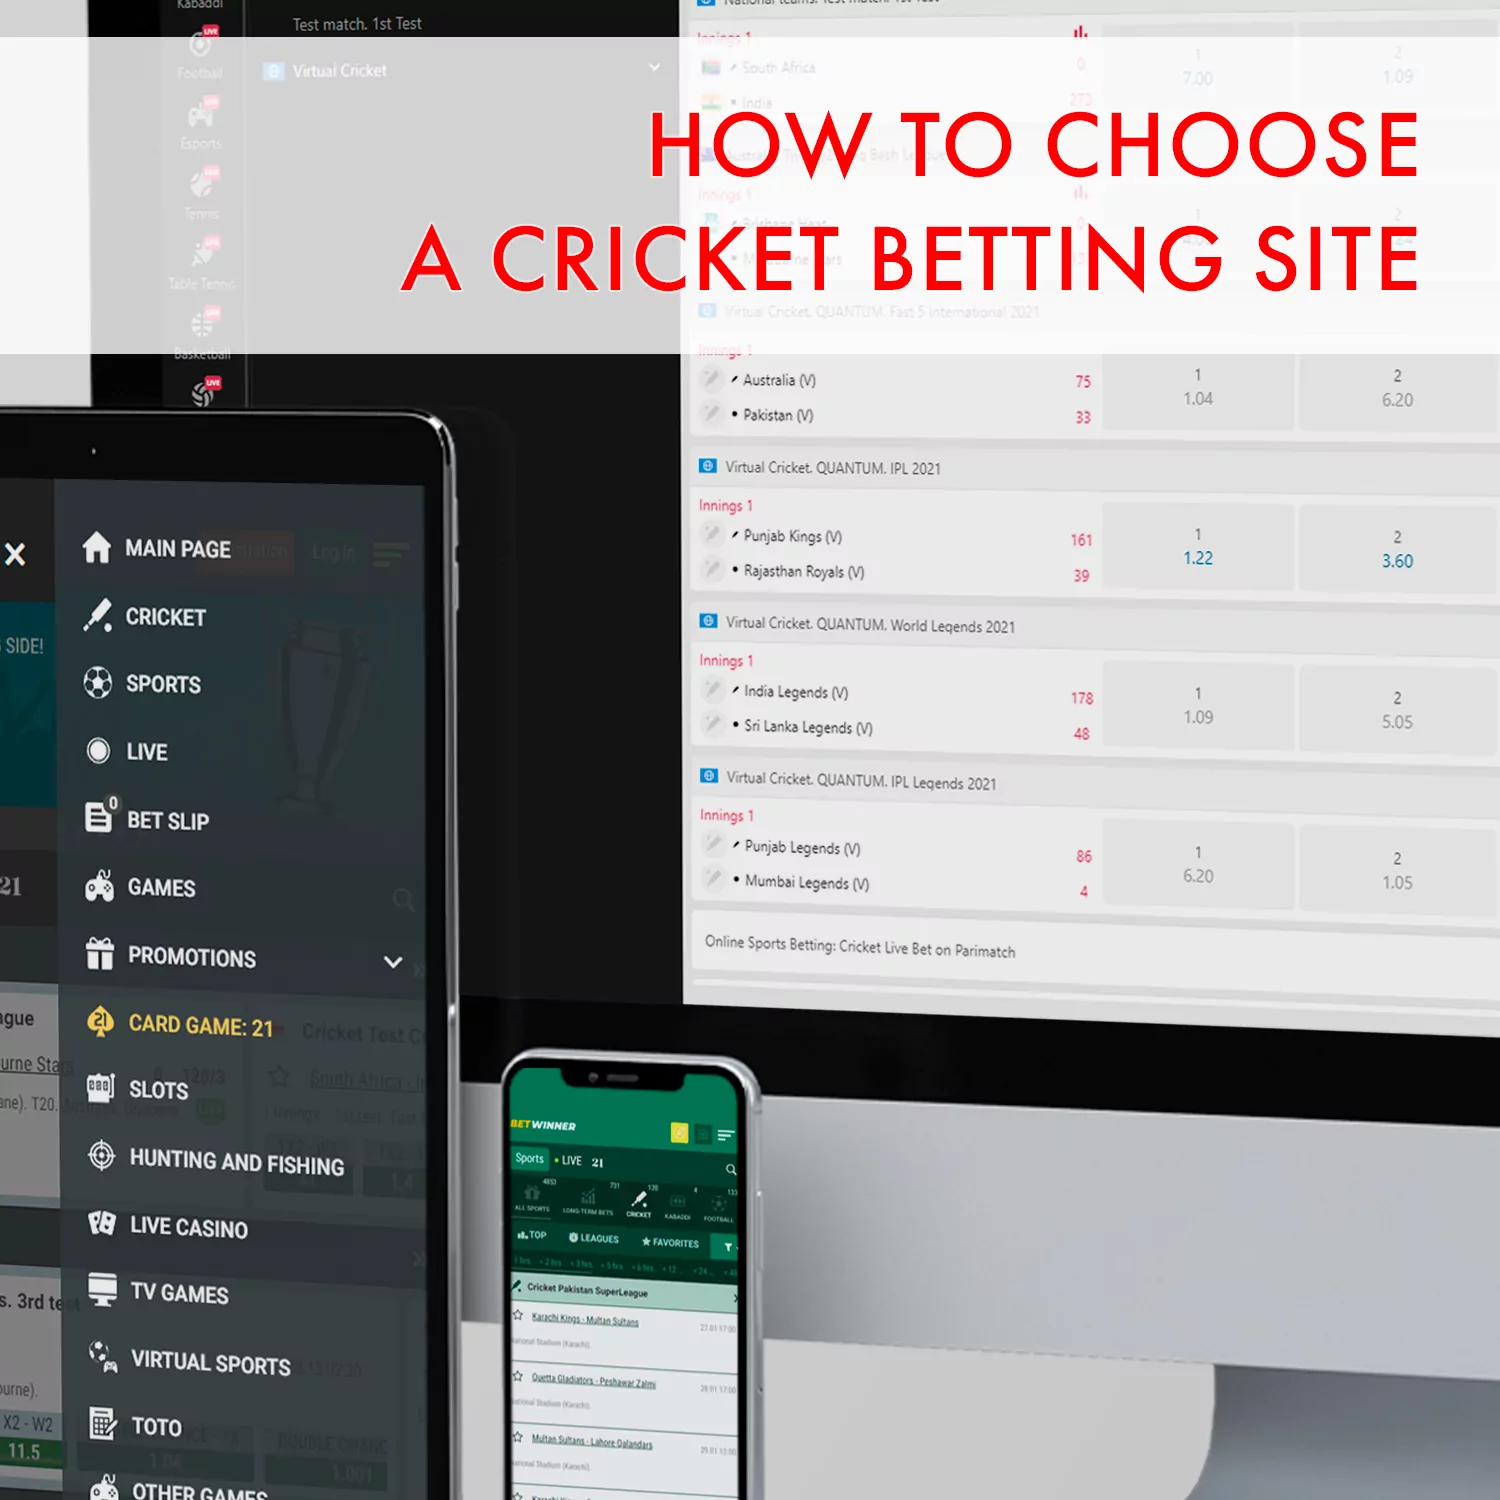 We recommend paying attention to those factors when you choose a site for placing bets on cricket.